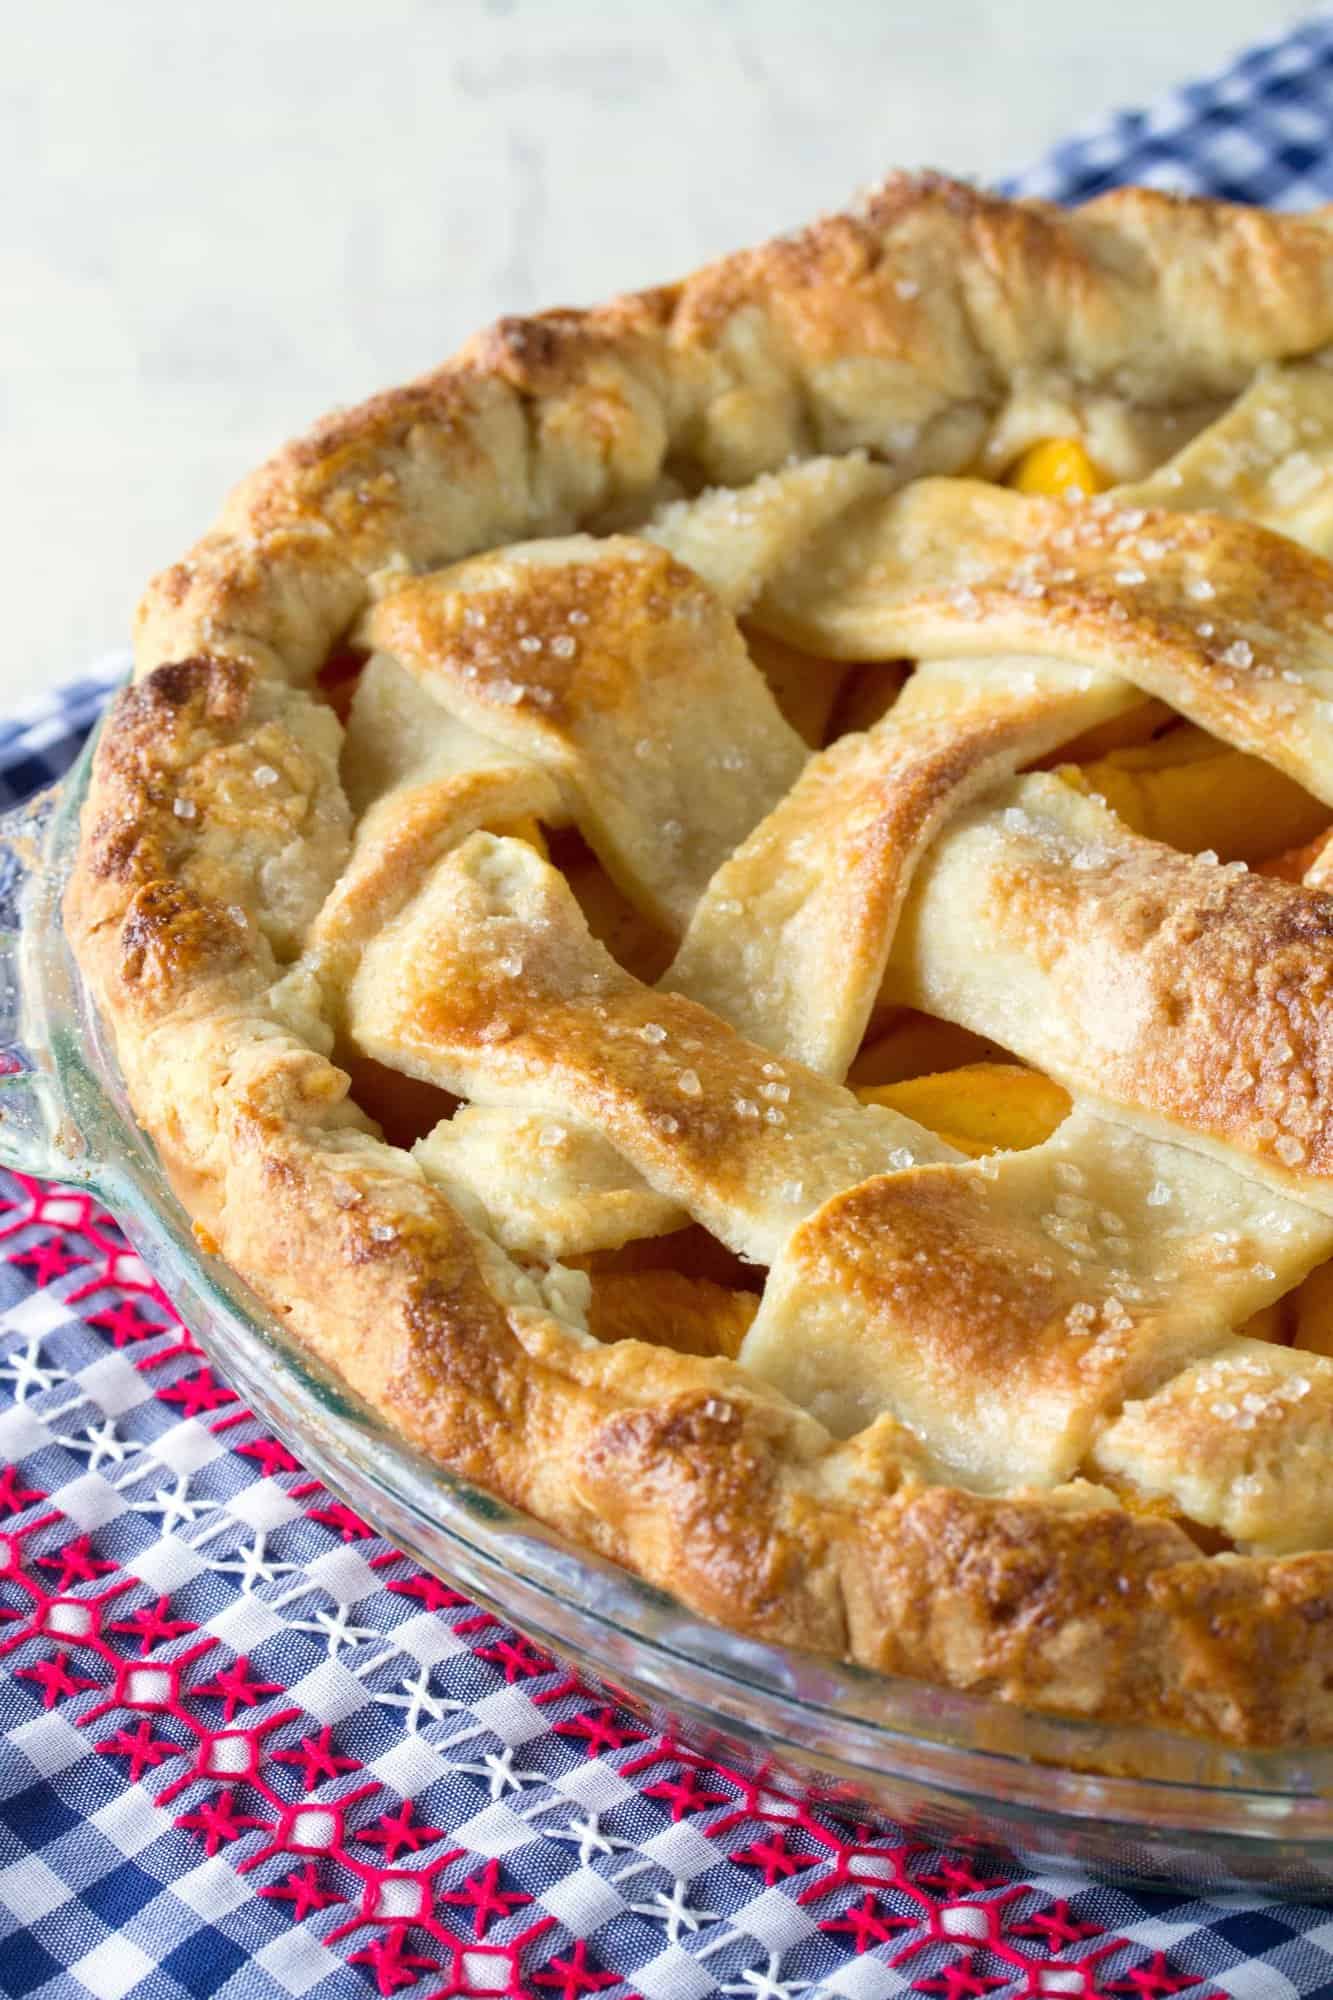 The perfect peach pie is within your grasp. A vibrant, sweet peach filling surrounded by a perfect fail-proof crust. It's all about the secret ingredient.